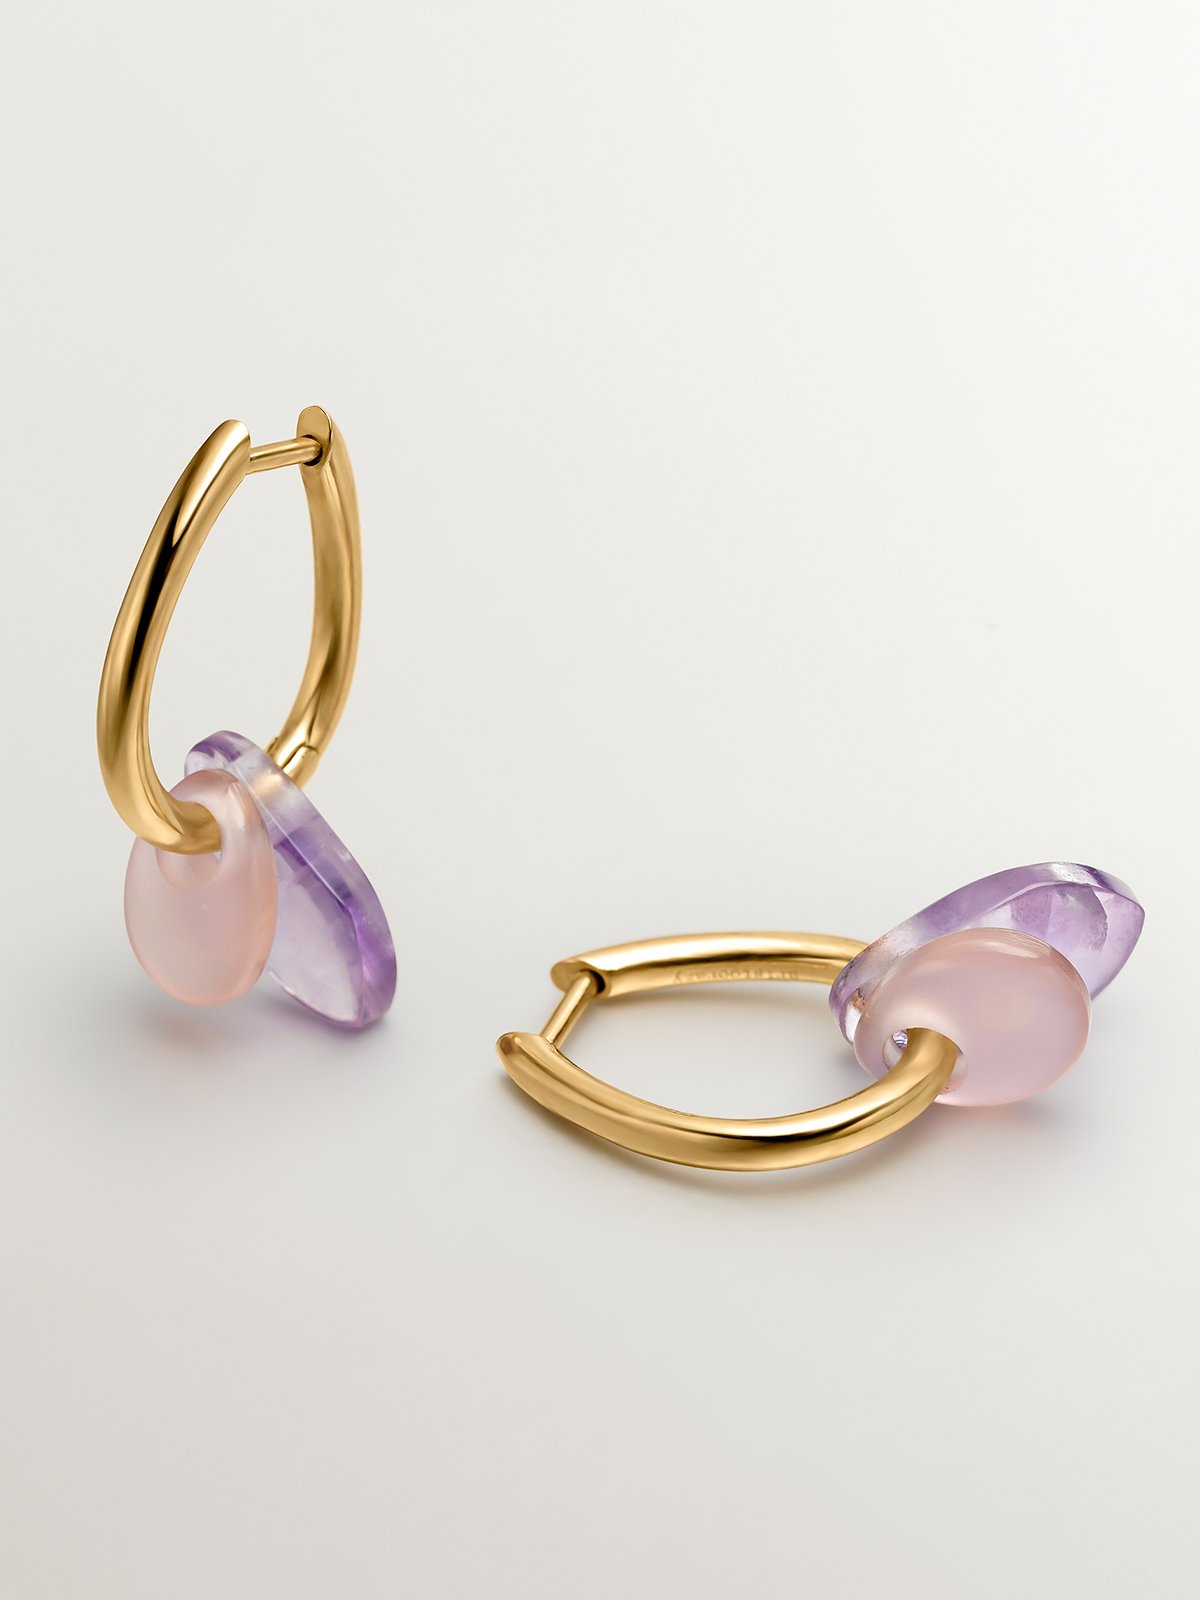 925 silver ring earrings in 18k yellow gold with Ágata